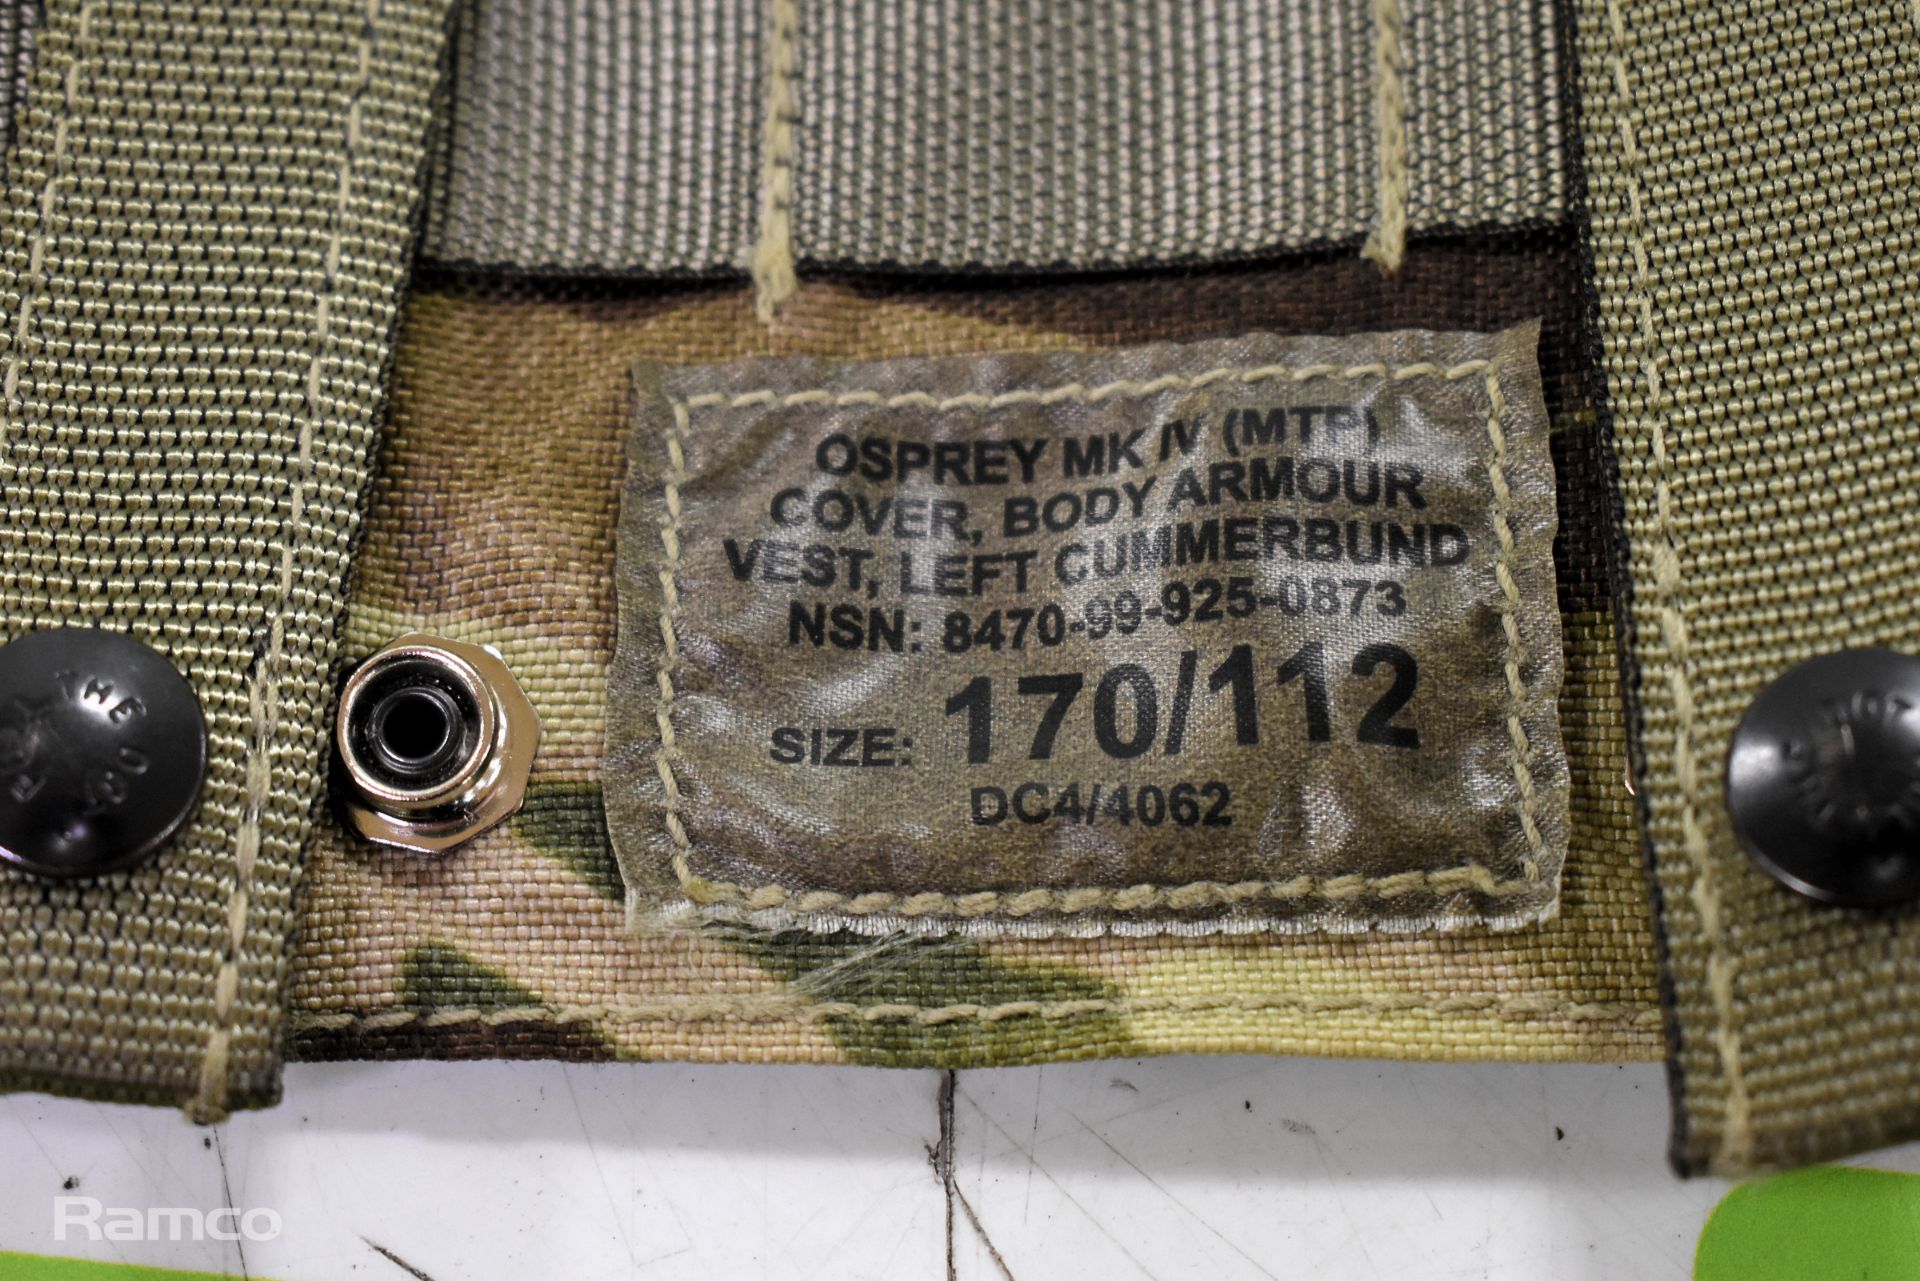 14x British Army MTP Osprey MK IV cummerbund vest body armour covers - mixed grades and sizes - Image 5 of 5